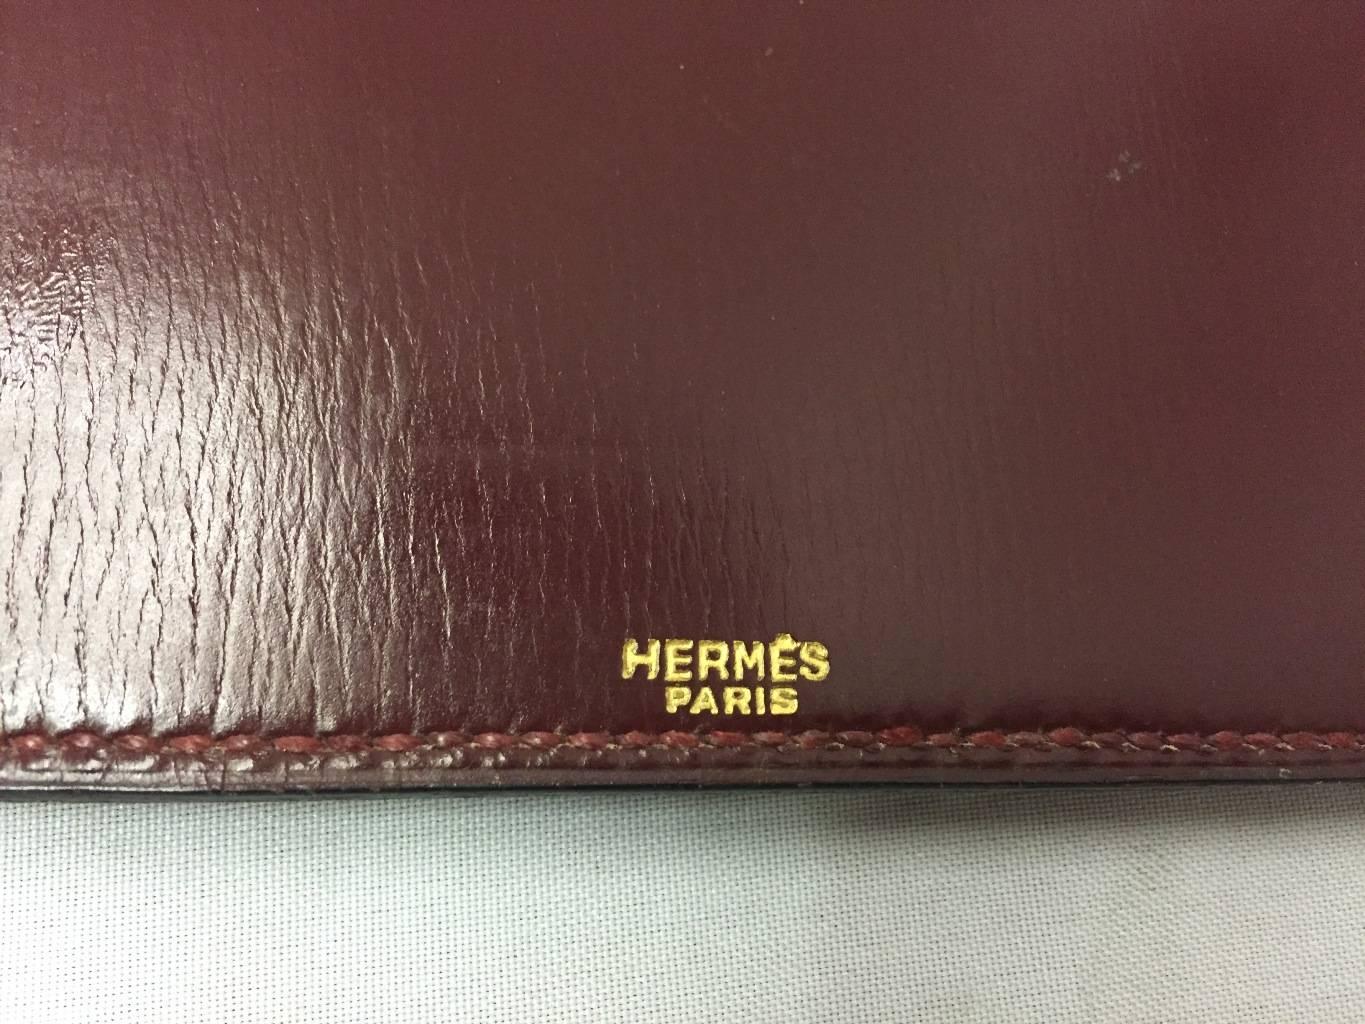 Hermes Leather Agenda Cover Day Planner In Good Condition For Sale In Cypress, CA